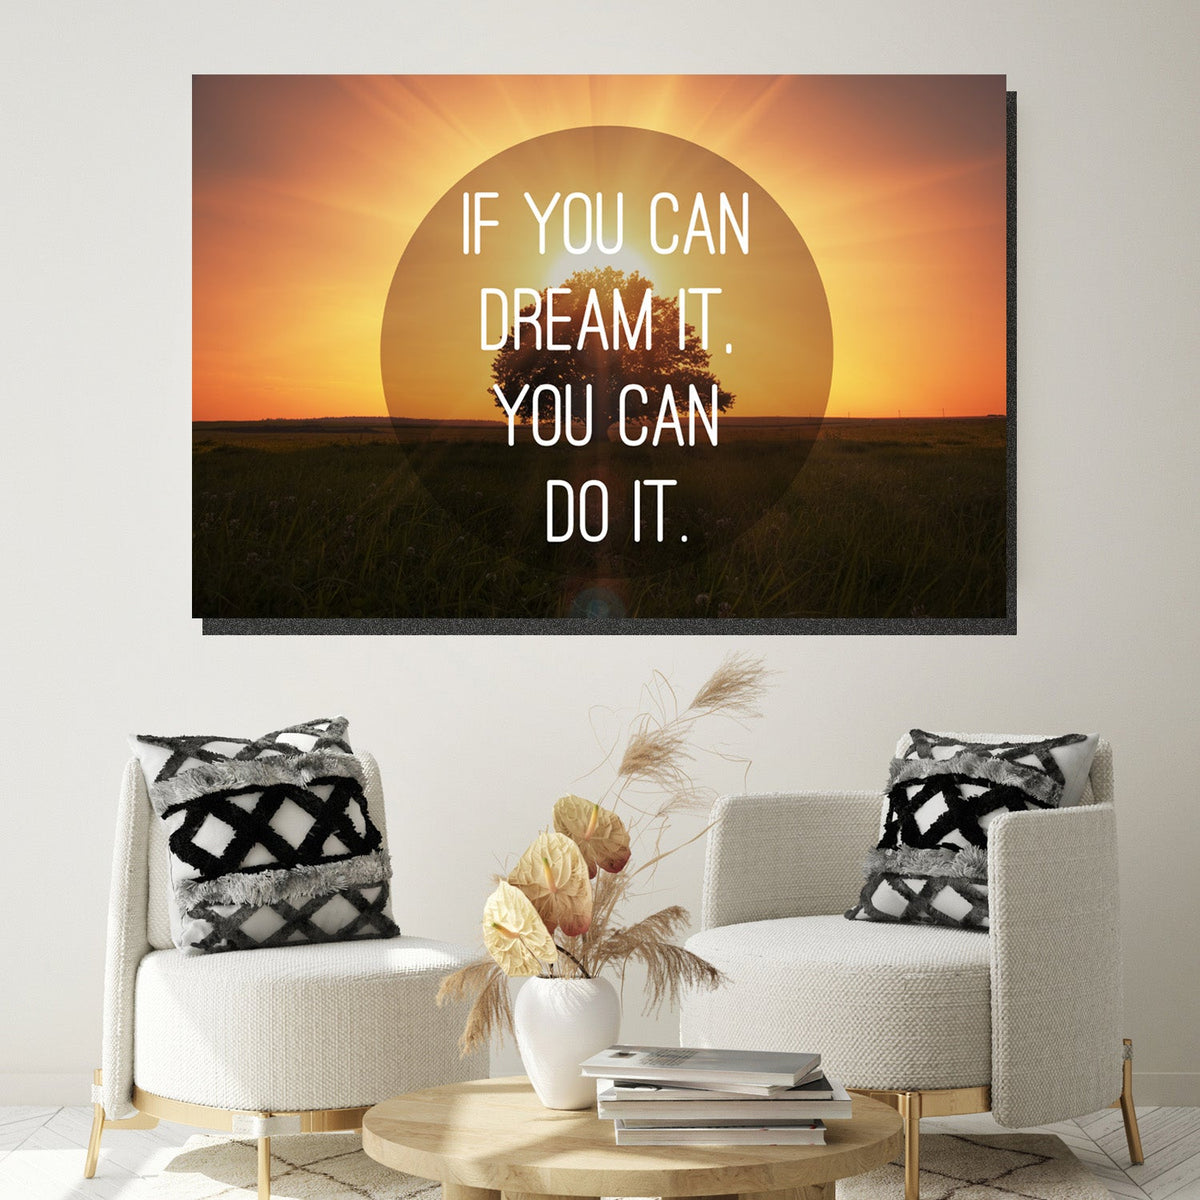 https://cdn.shopify.com/s/files/1/0387/9986/8044/products/DreamCanvasArtprintStretched-3.jpg